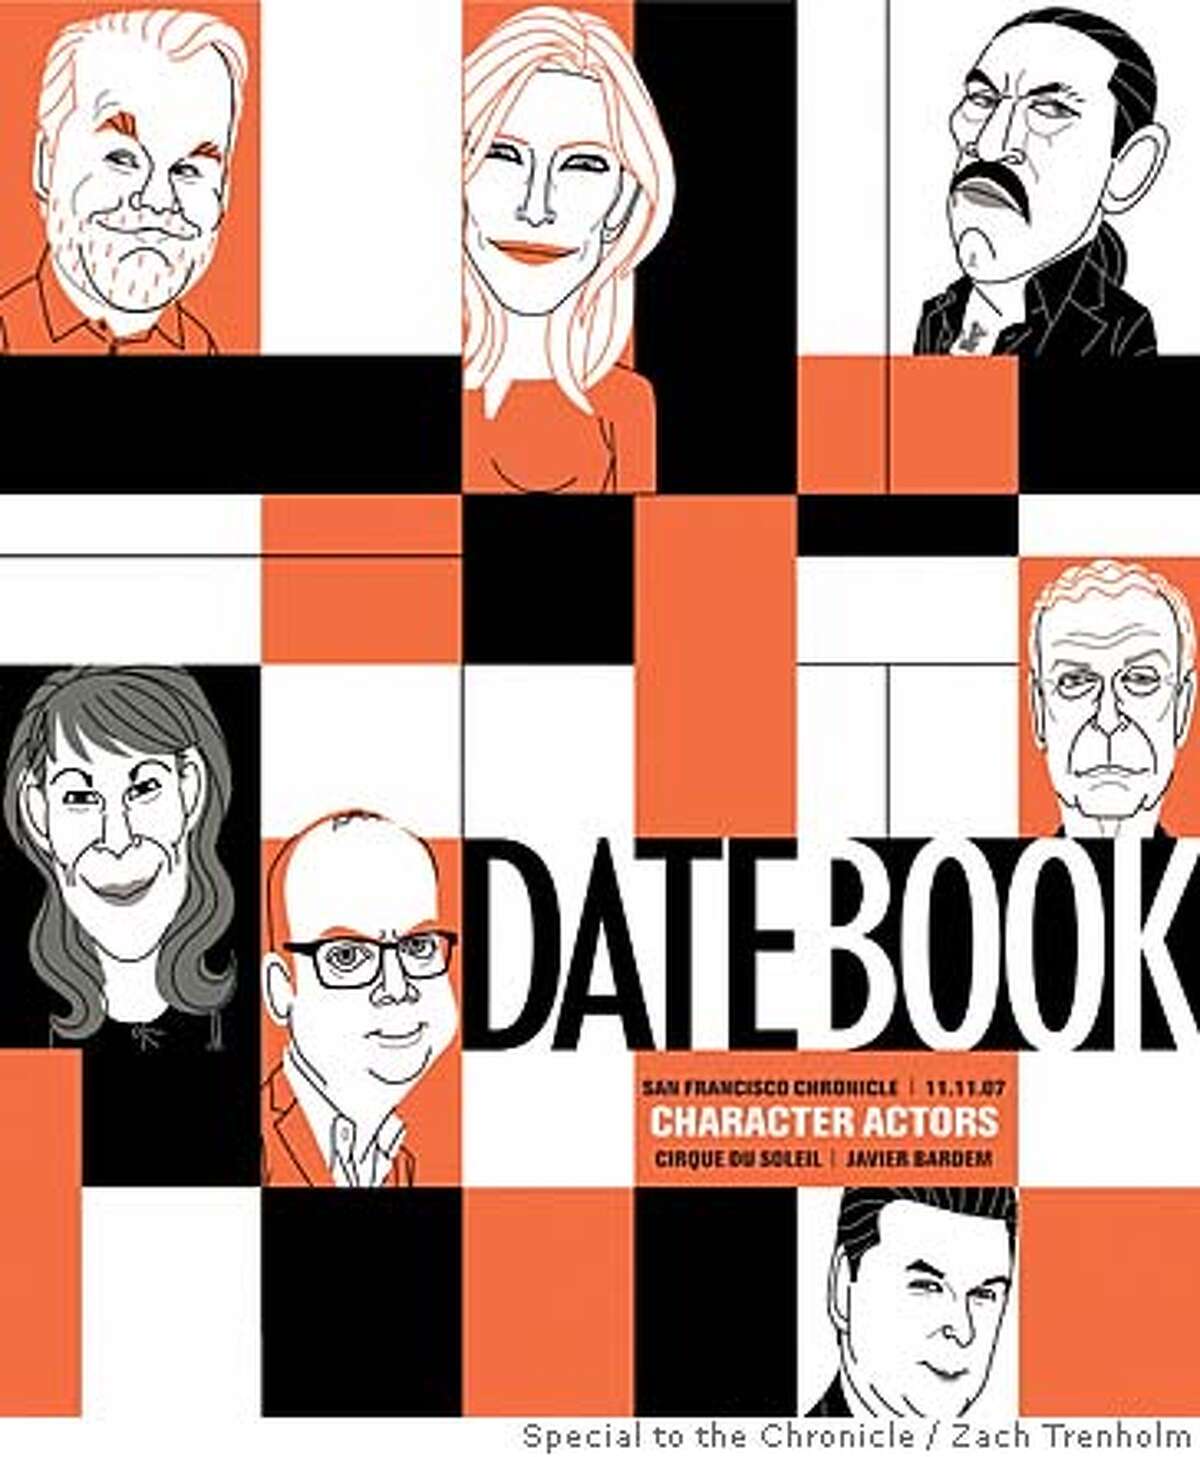 Character actors (clockwise from upper left): Philip Seymour Hoffman, Cate Blanchett, Danny Trejo, Michael Caine, Alec Baldwin, Paul Giamatti and Lili Taylor. Illustrations by Zach Trenholm, special to the Chronicle